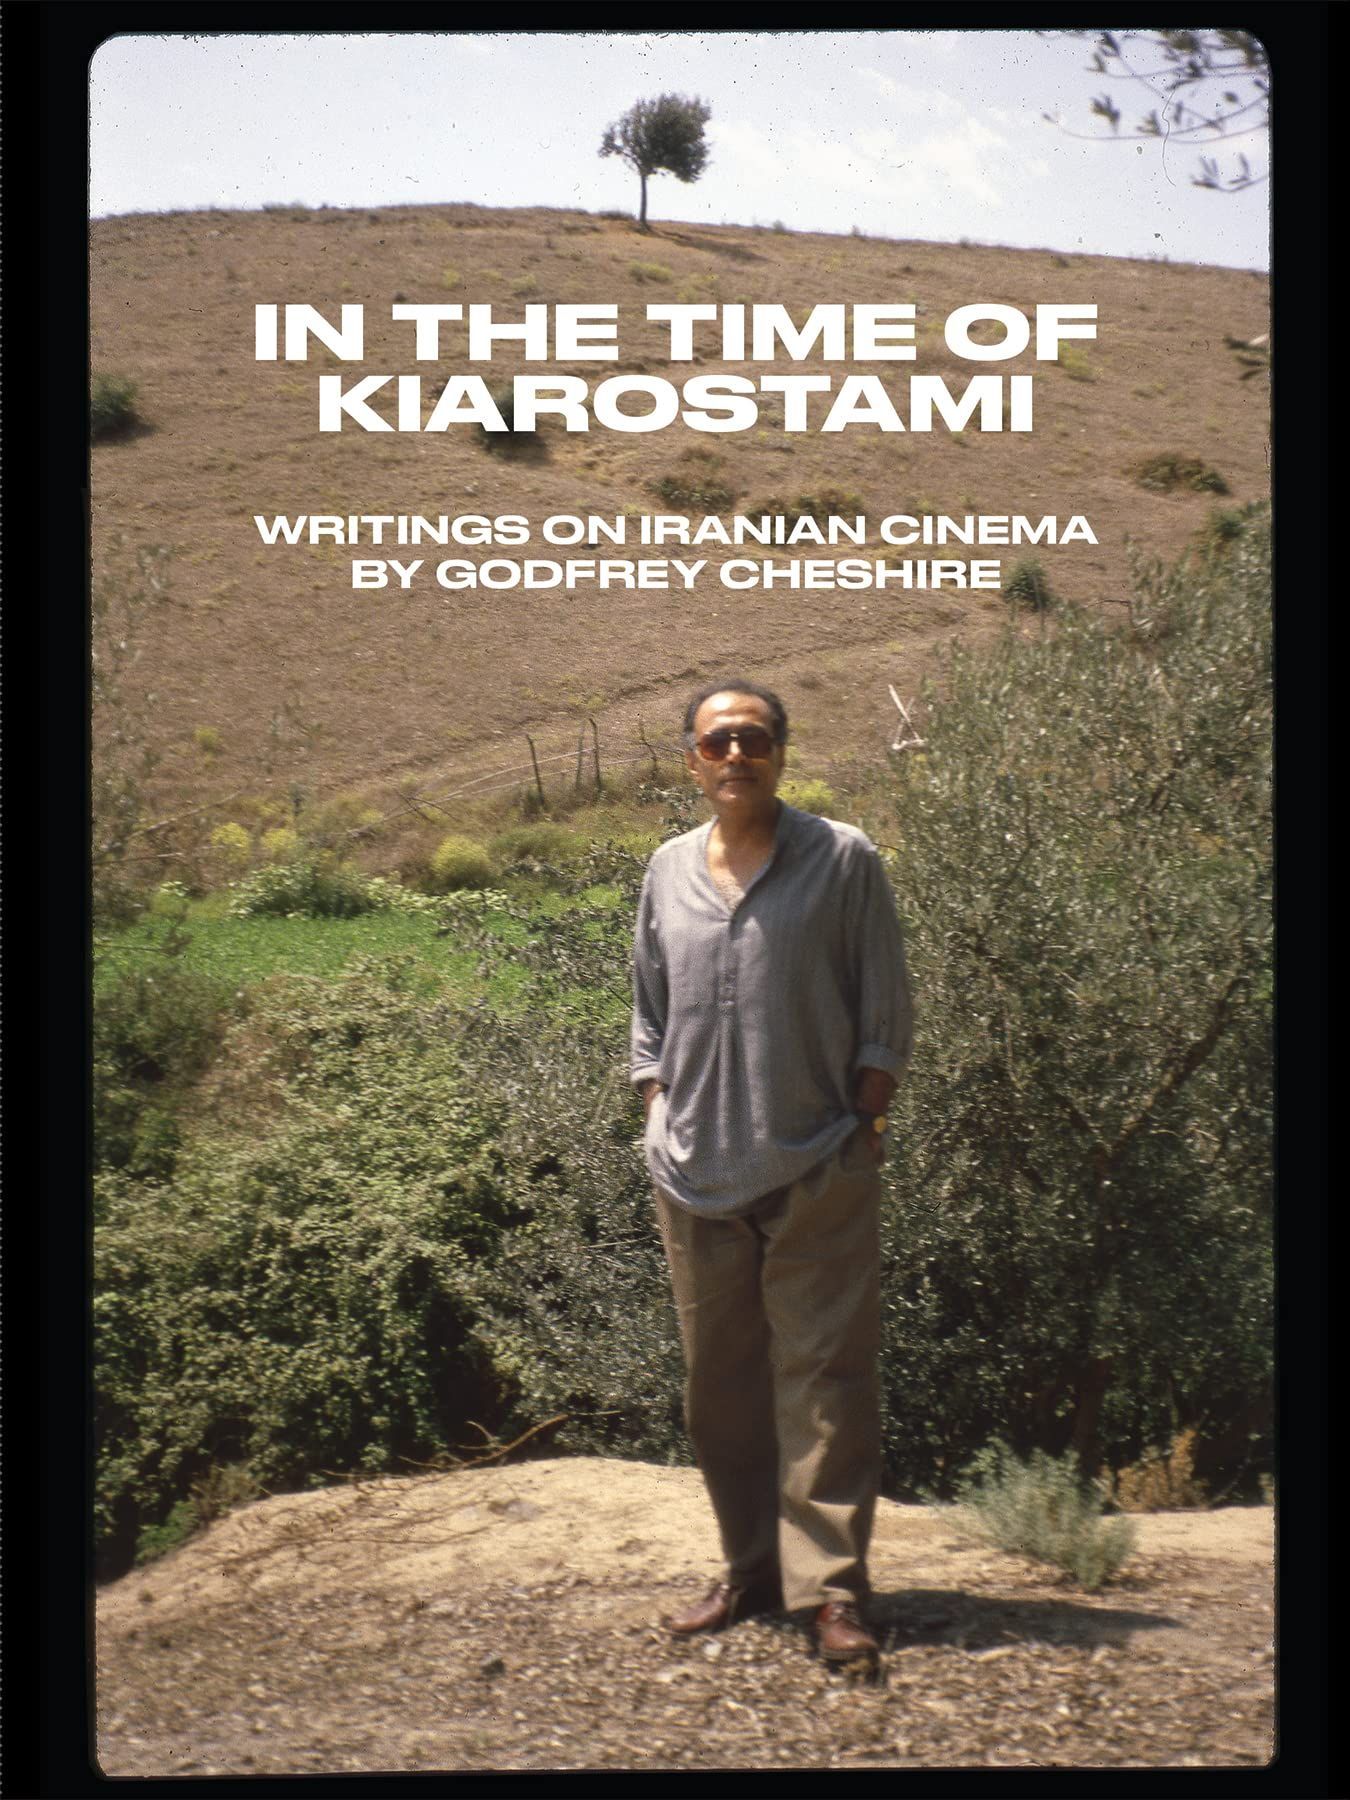 A Close-Up on Iranian Cinema: On Godfrey Cheshire’s “In the Time of Kiarostami”